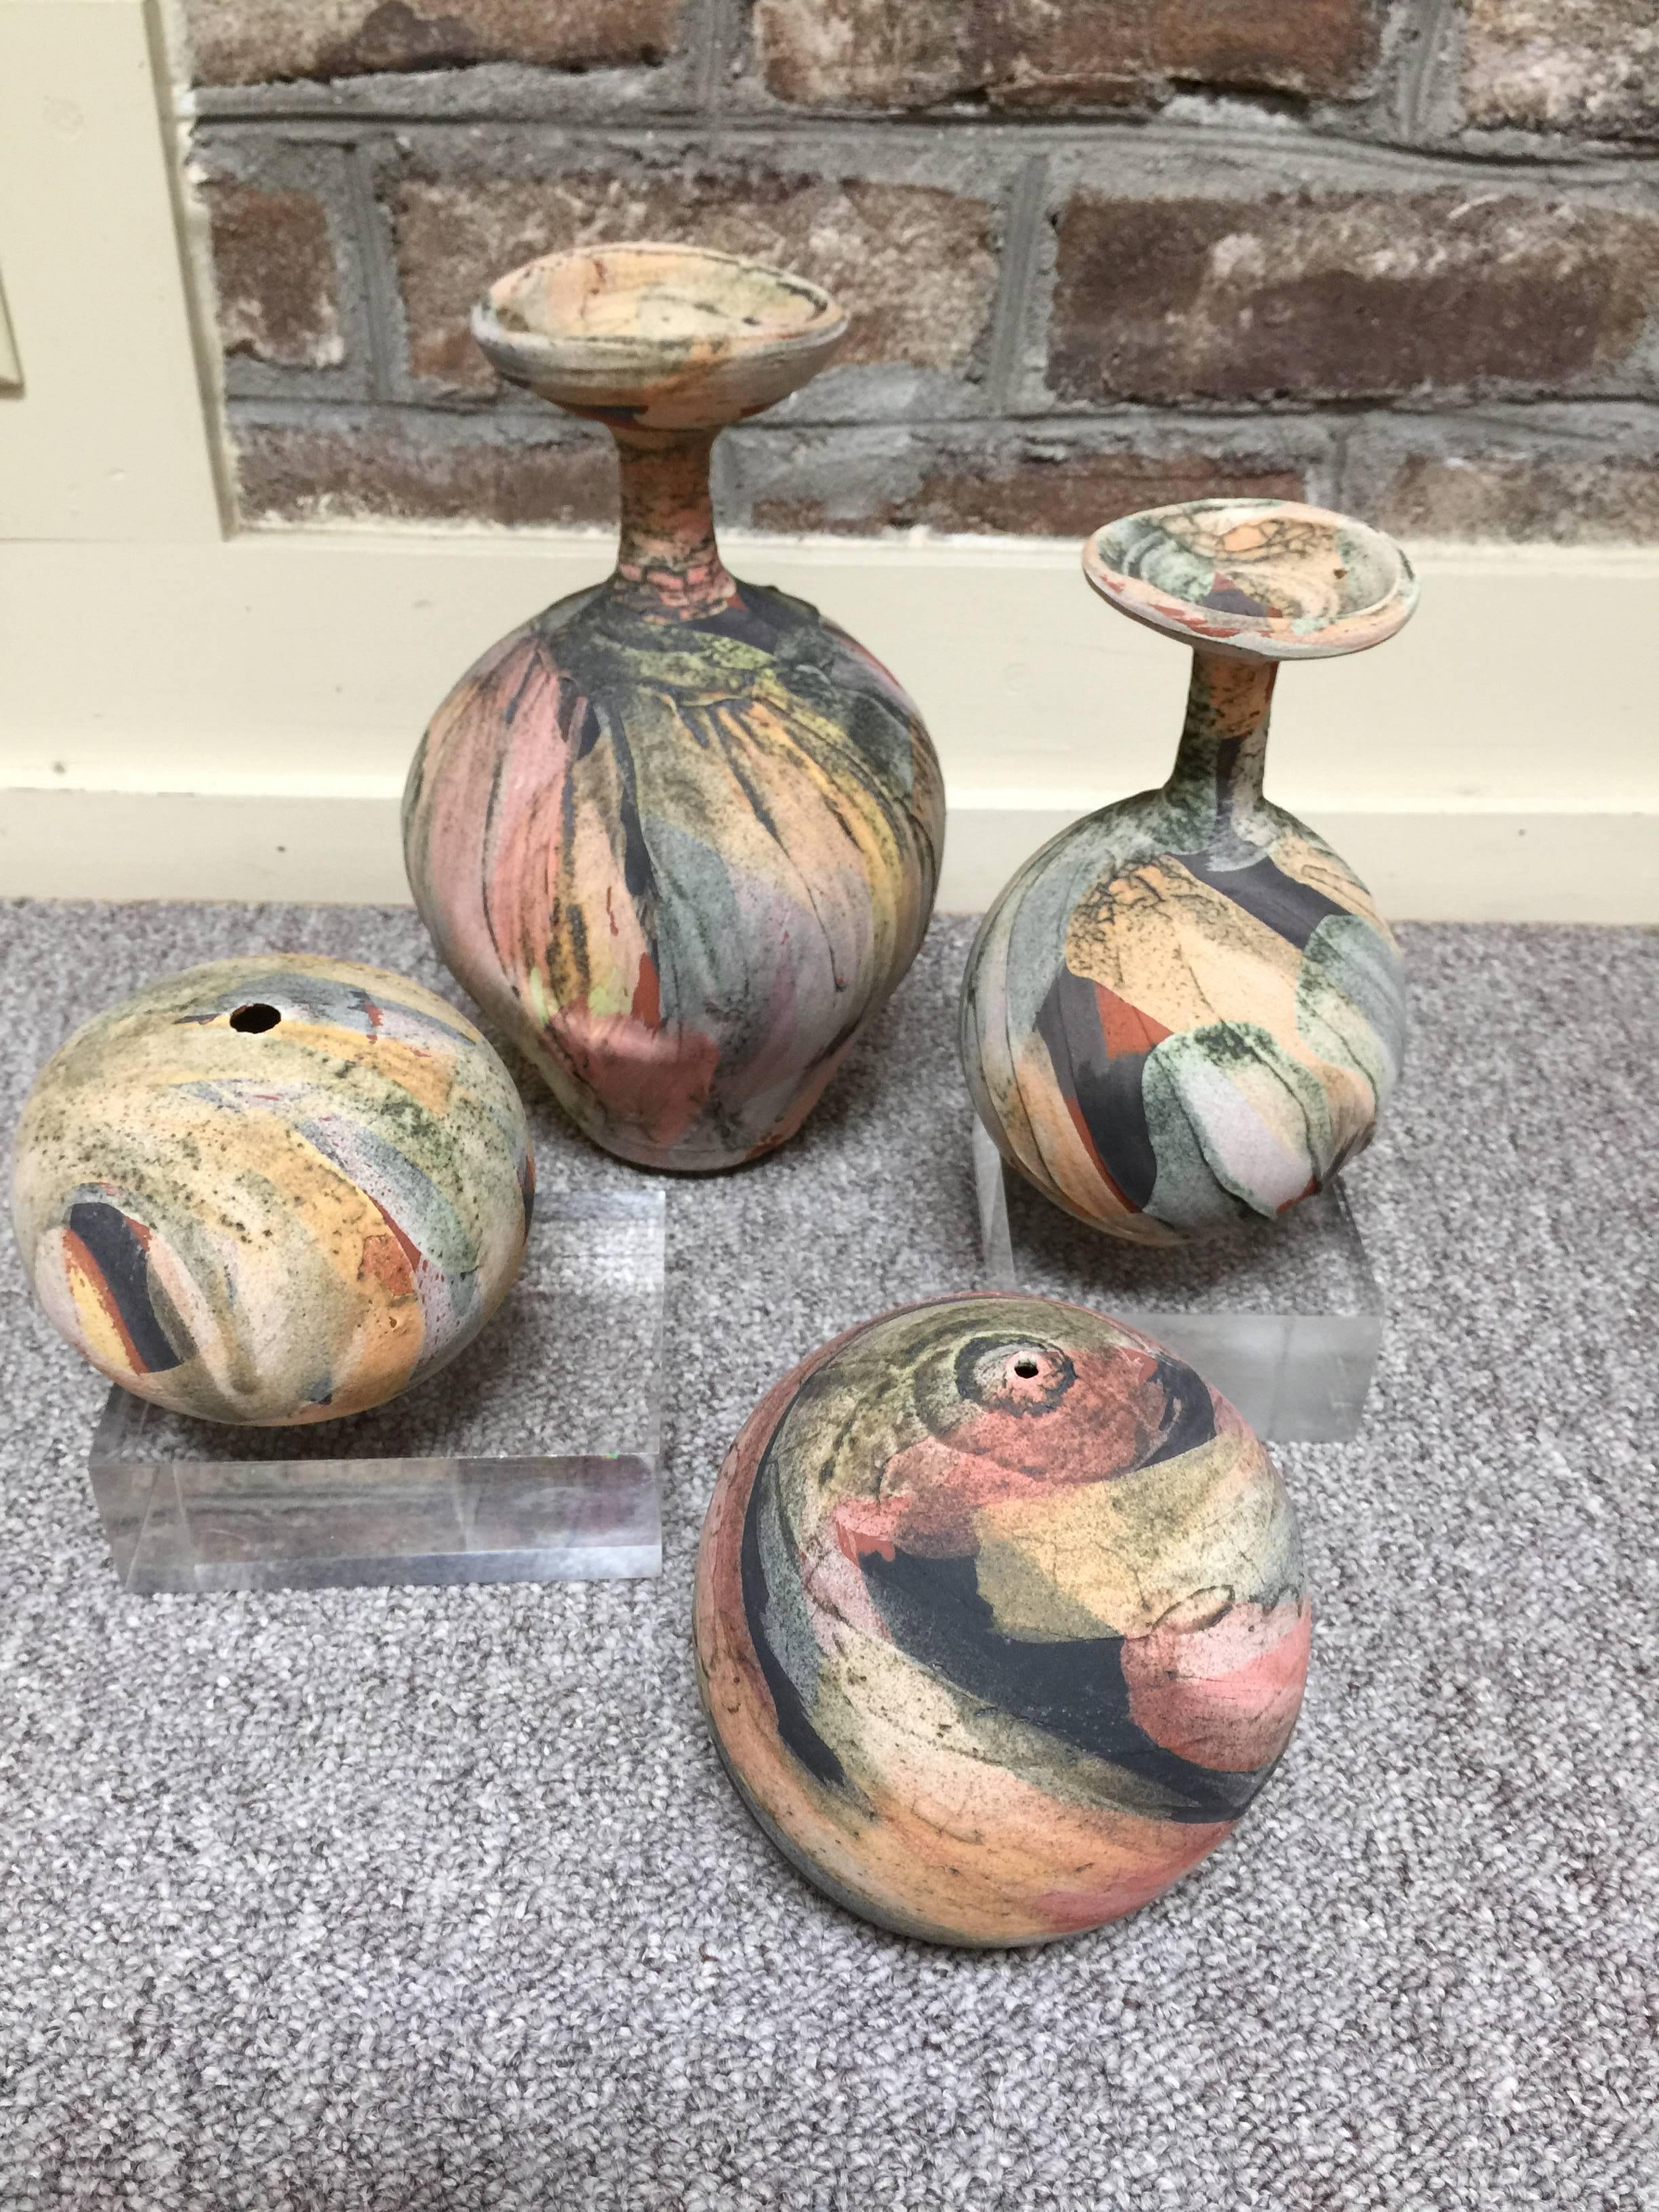 This wonderful grouping of pots has beautiful pastel tones and surface technique. Done by Arizona potter, Nicholas Bernard.
Measures: 10.5 x 7 x 7
8 x 5 x 5
6 x 6 x 6
4 x 5 x 5.